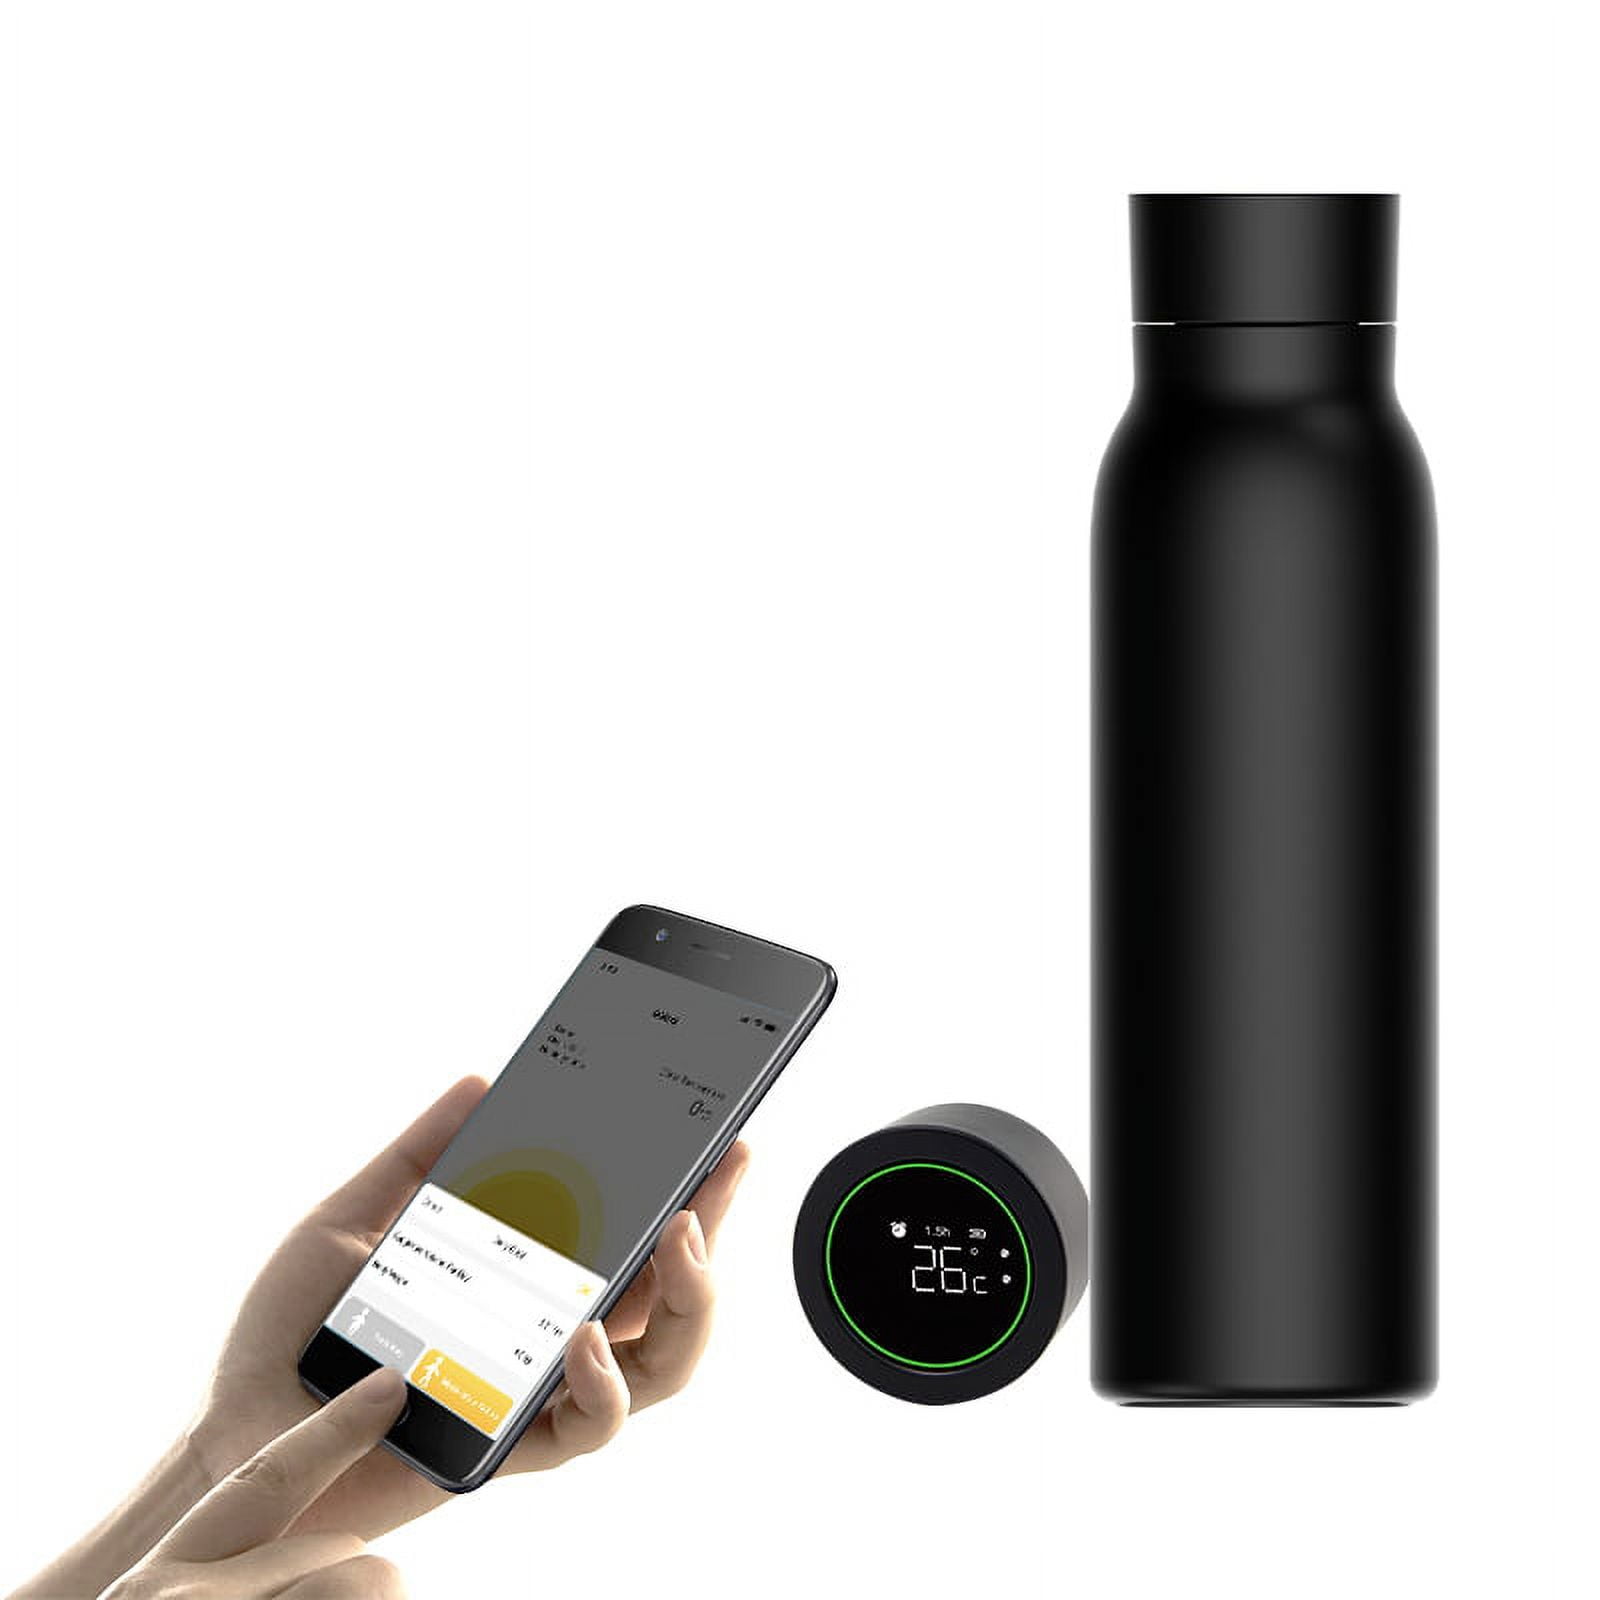 ULO DAZE 16oz Smart Water Bottle with Temperature Display - Thermal  Stainless Steel Hot and Cold Water Bottles - Silicone Grip, Tea Strainer